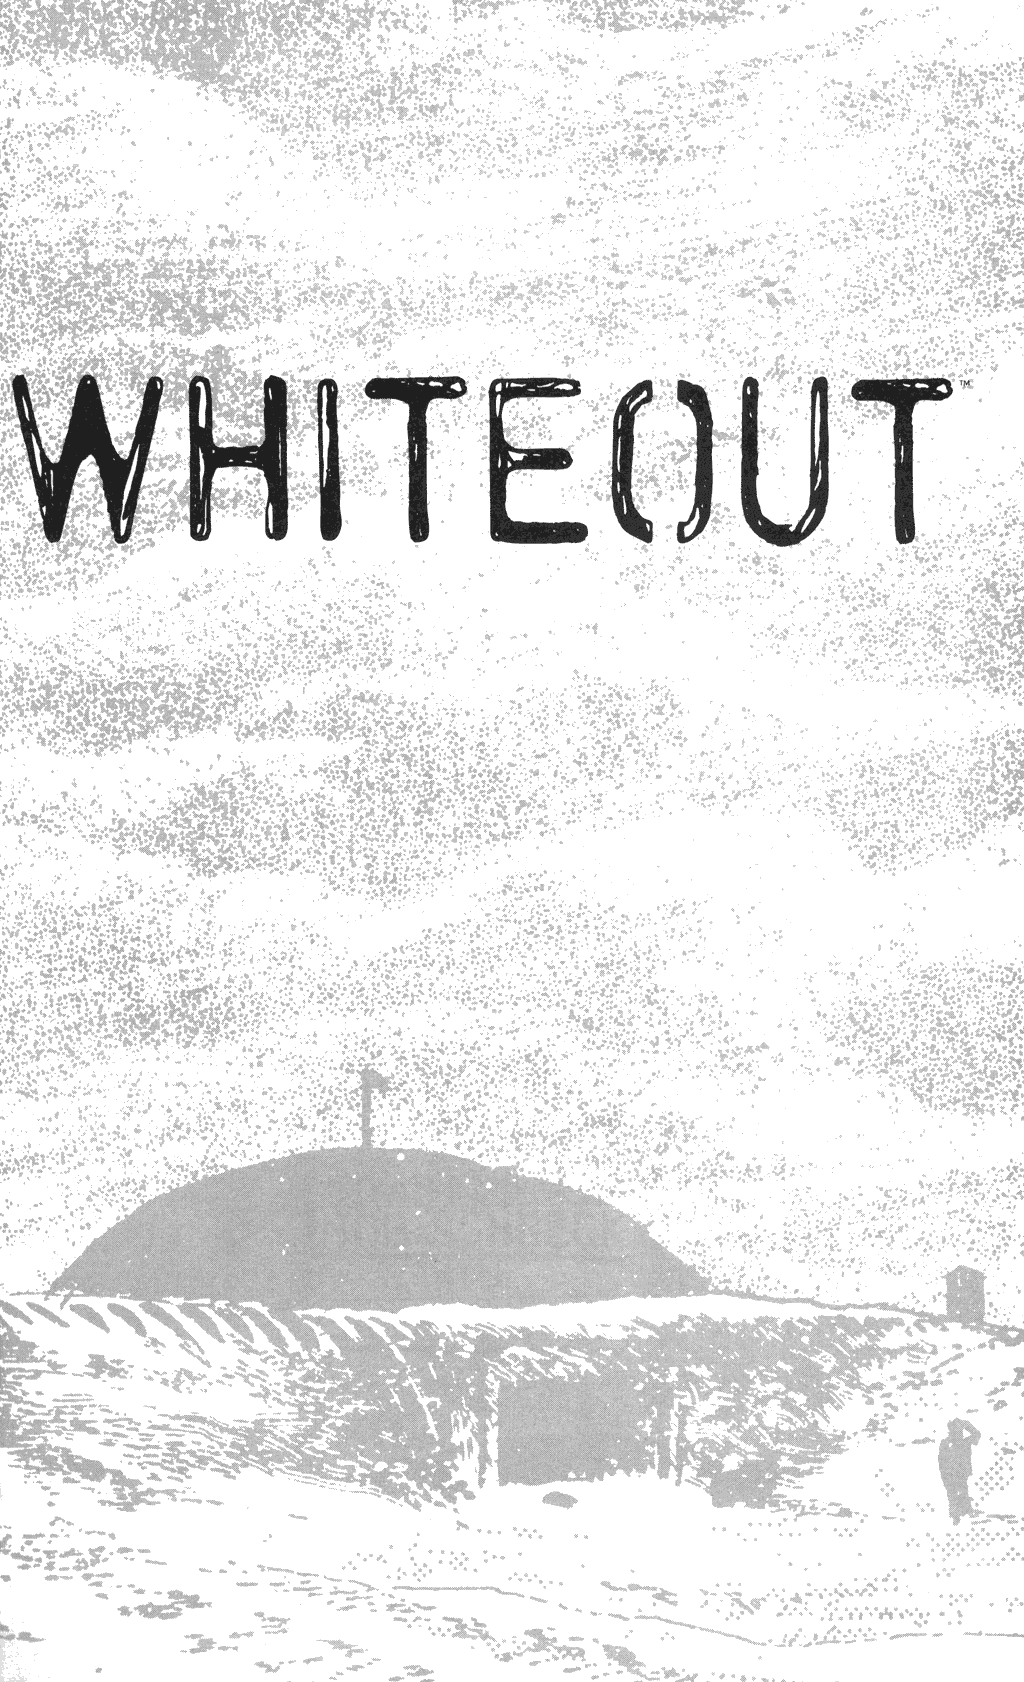 Read online Whiteout comic -  Issue # TPB - 3